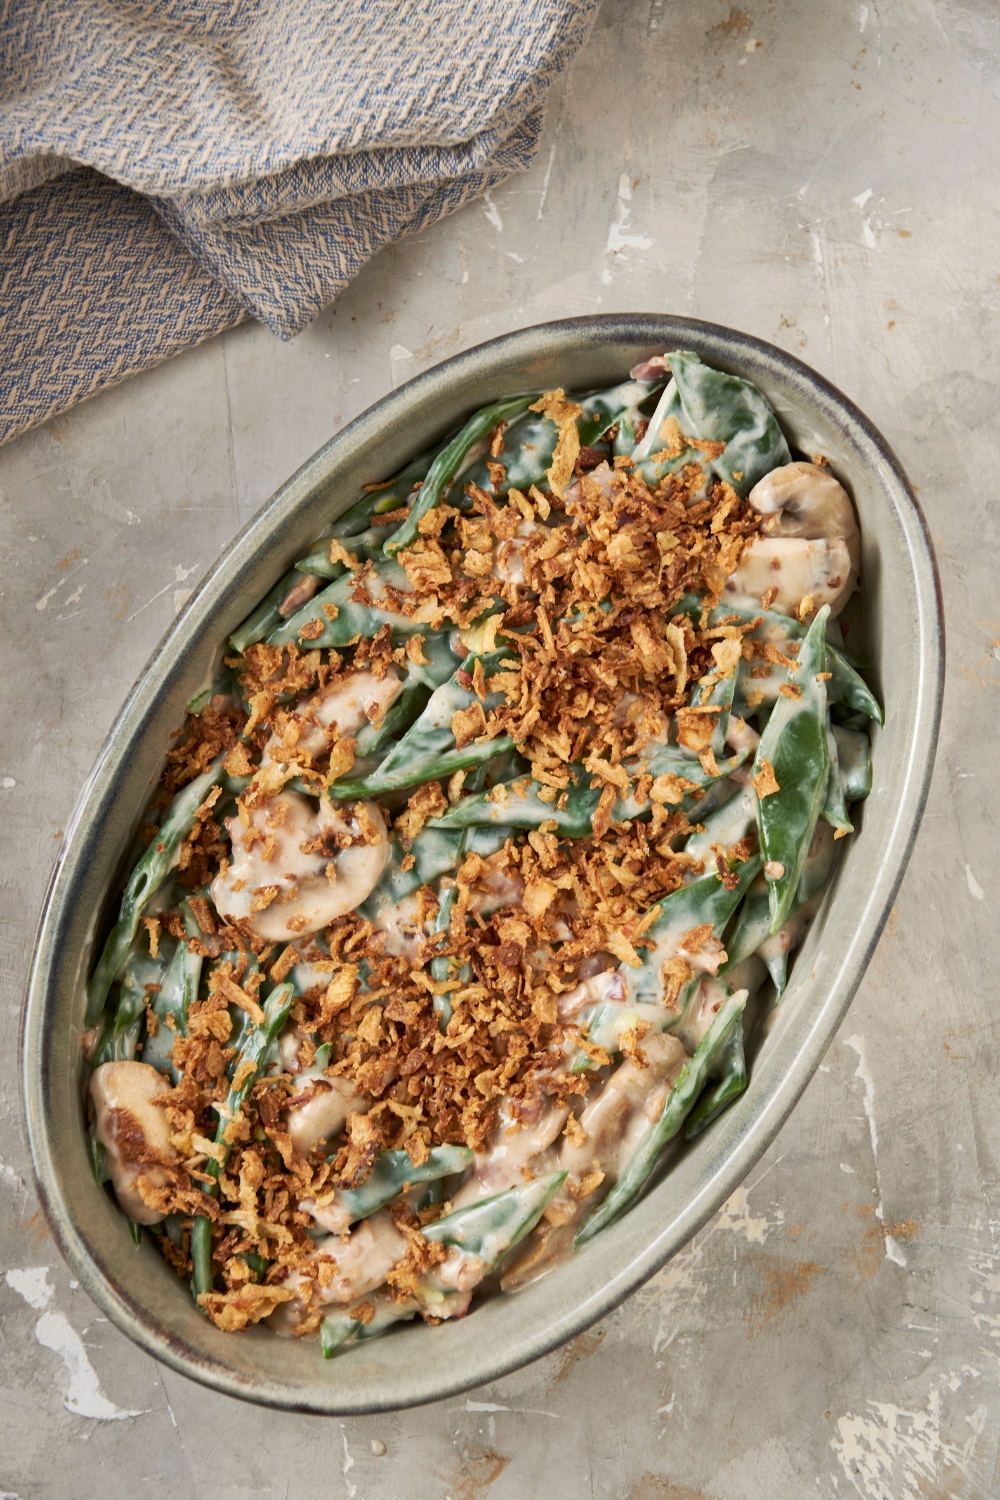 A casserole dish full of green bean casserole sits on a gray counter. It is topped with crispy onions.